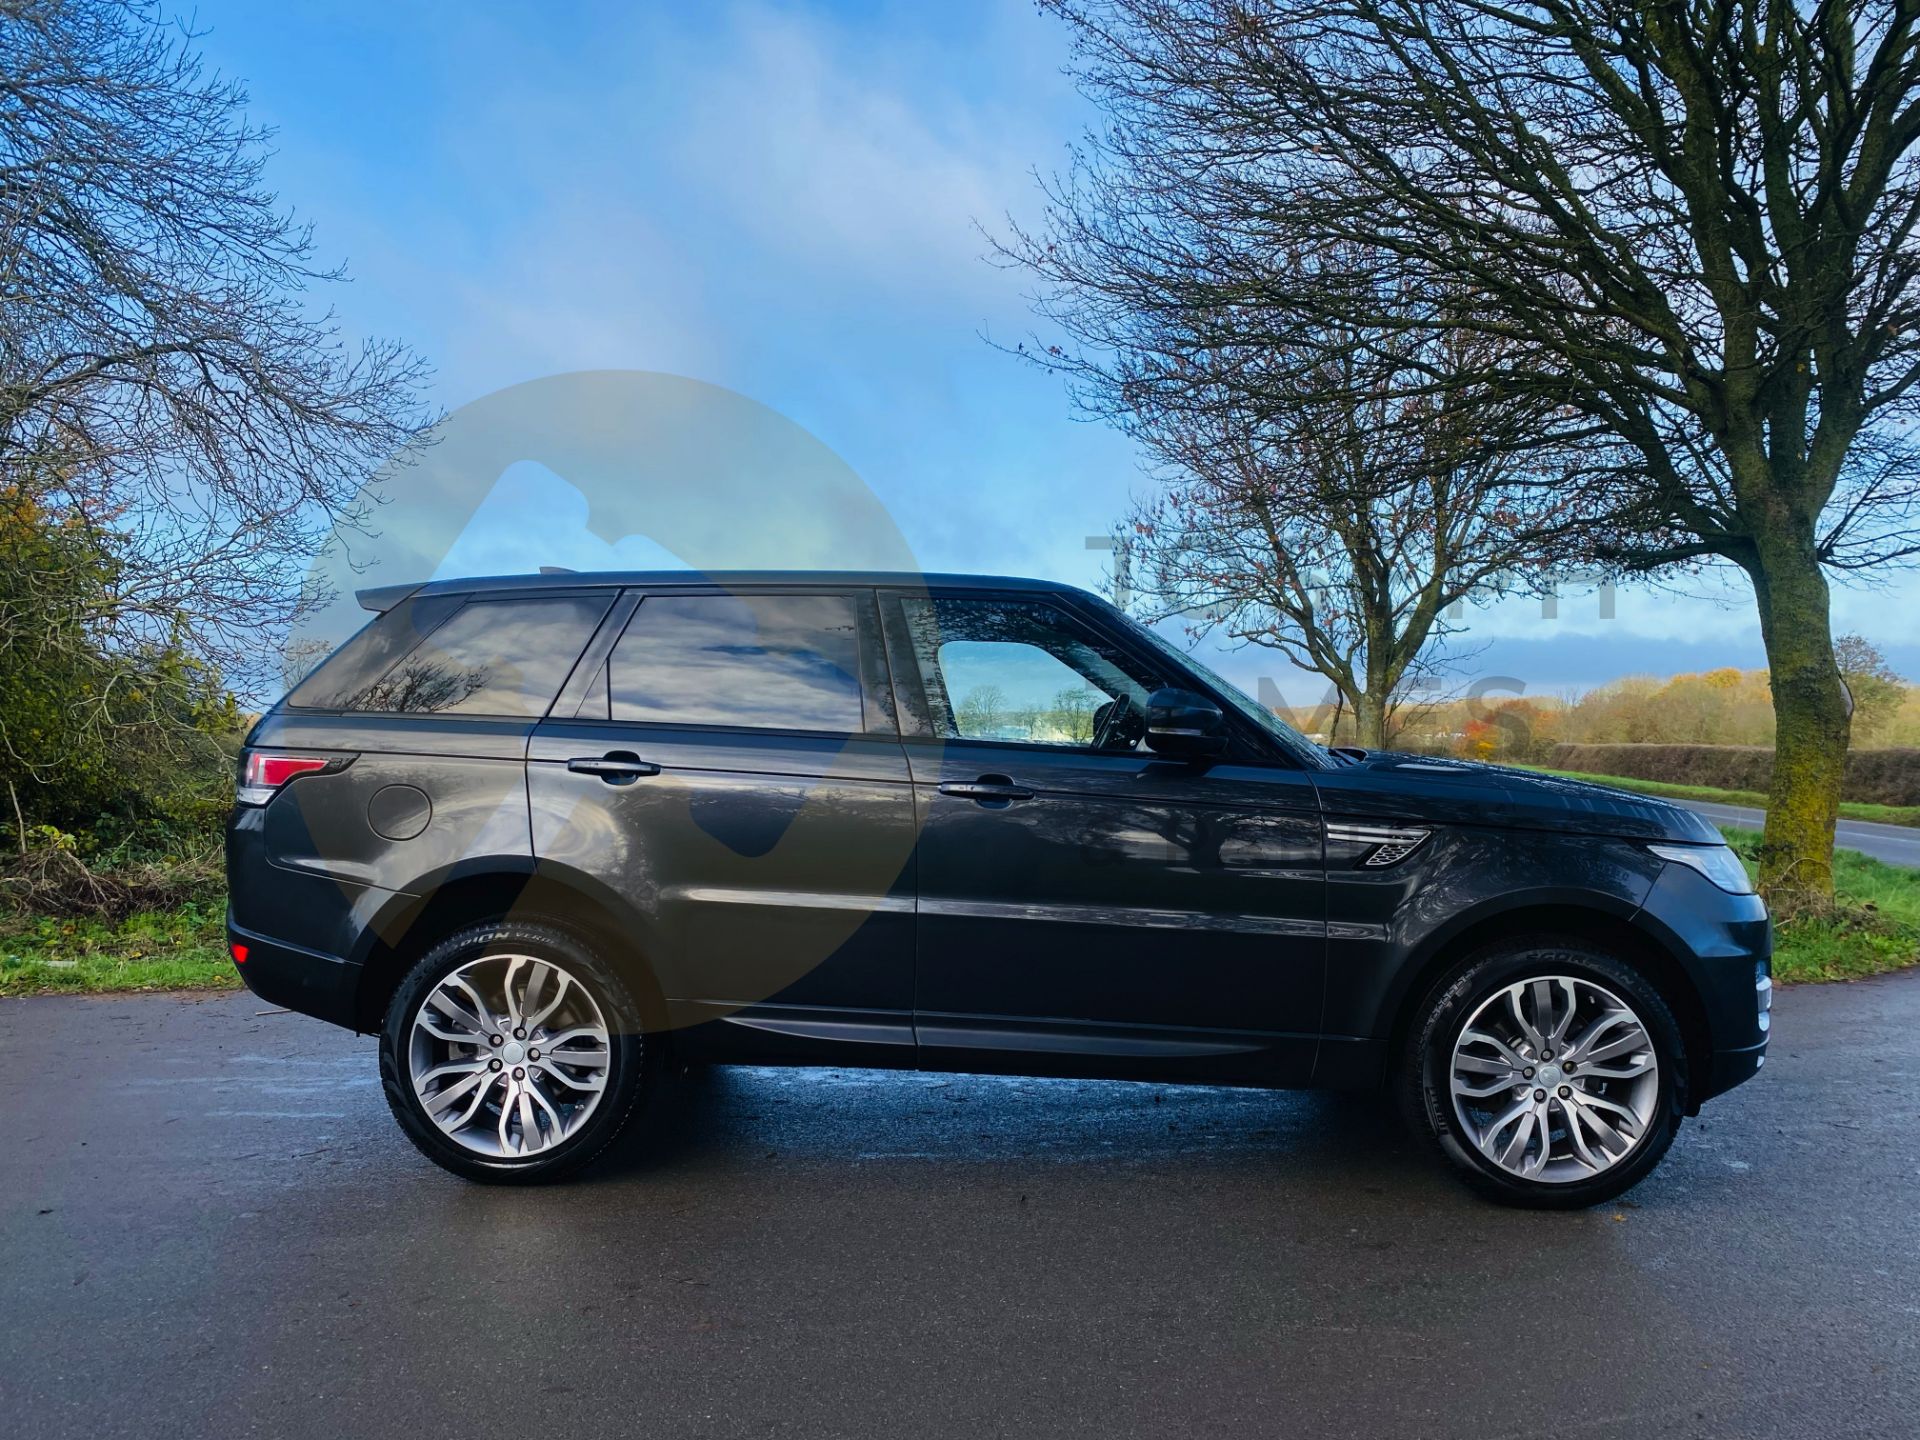 (ON SALE) RANGE ROVER SPORT "HSE" AUTO (NEW SHAPE) 17 REG - LEATHER - PANORAMIC ROOF - SAT NAV - - Image 11 of 47